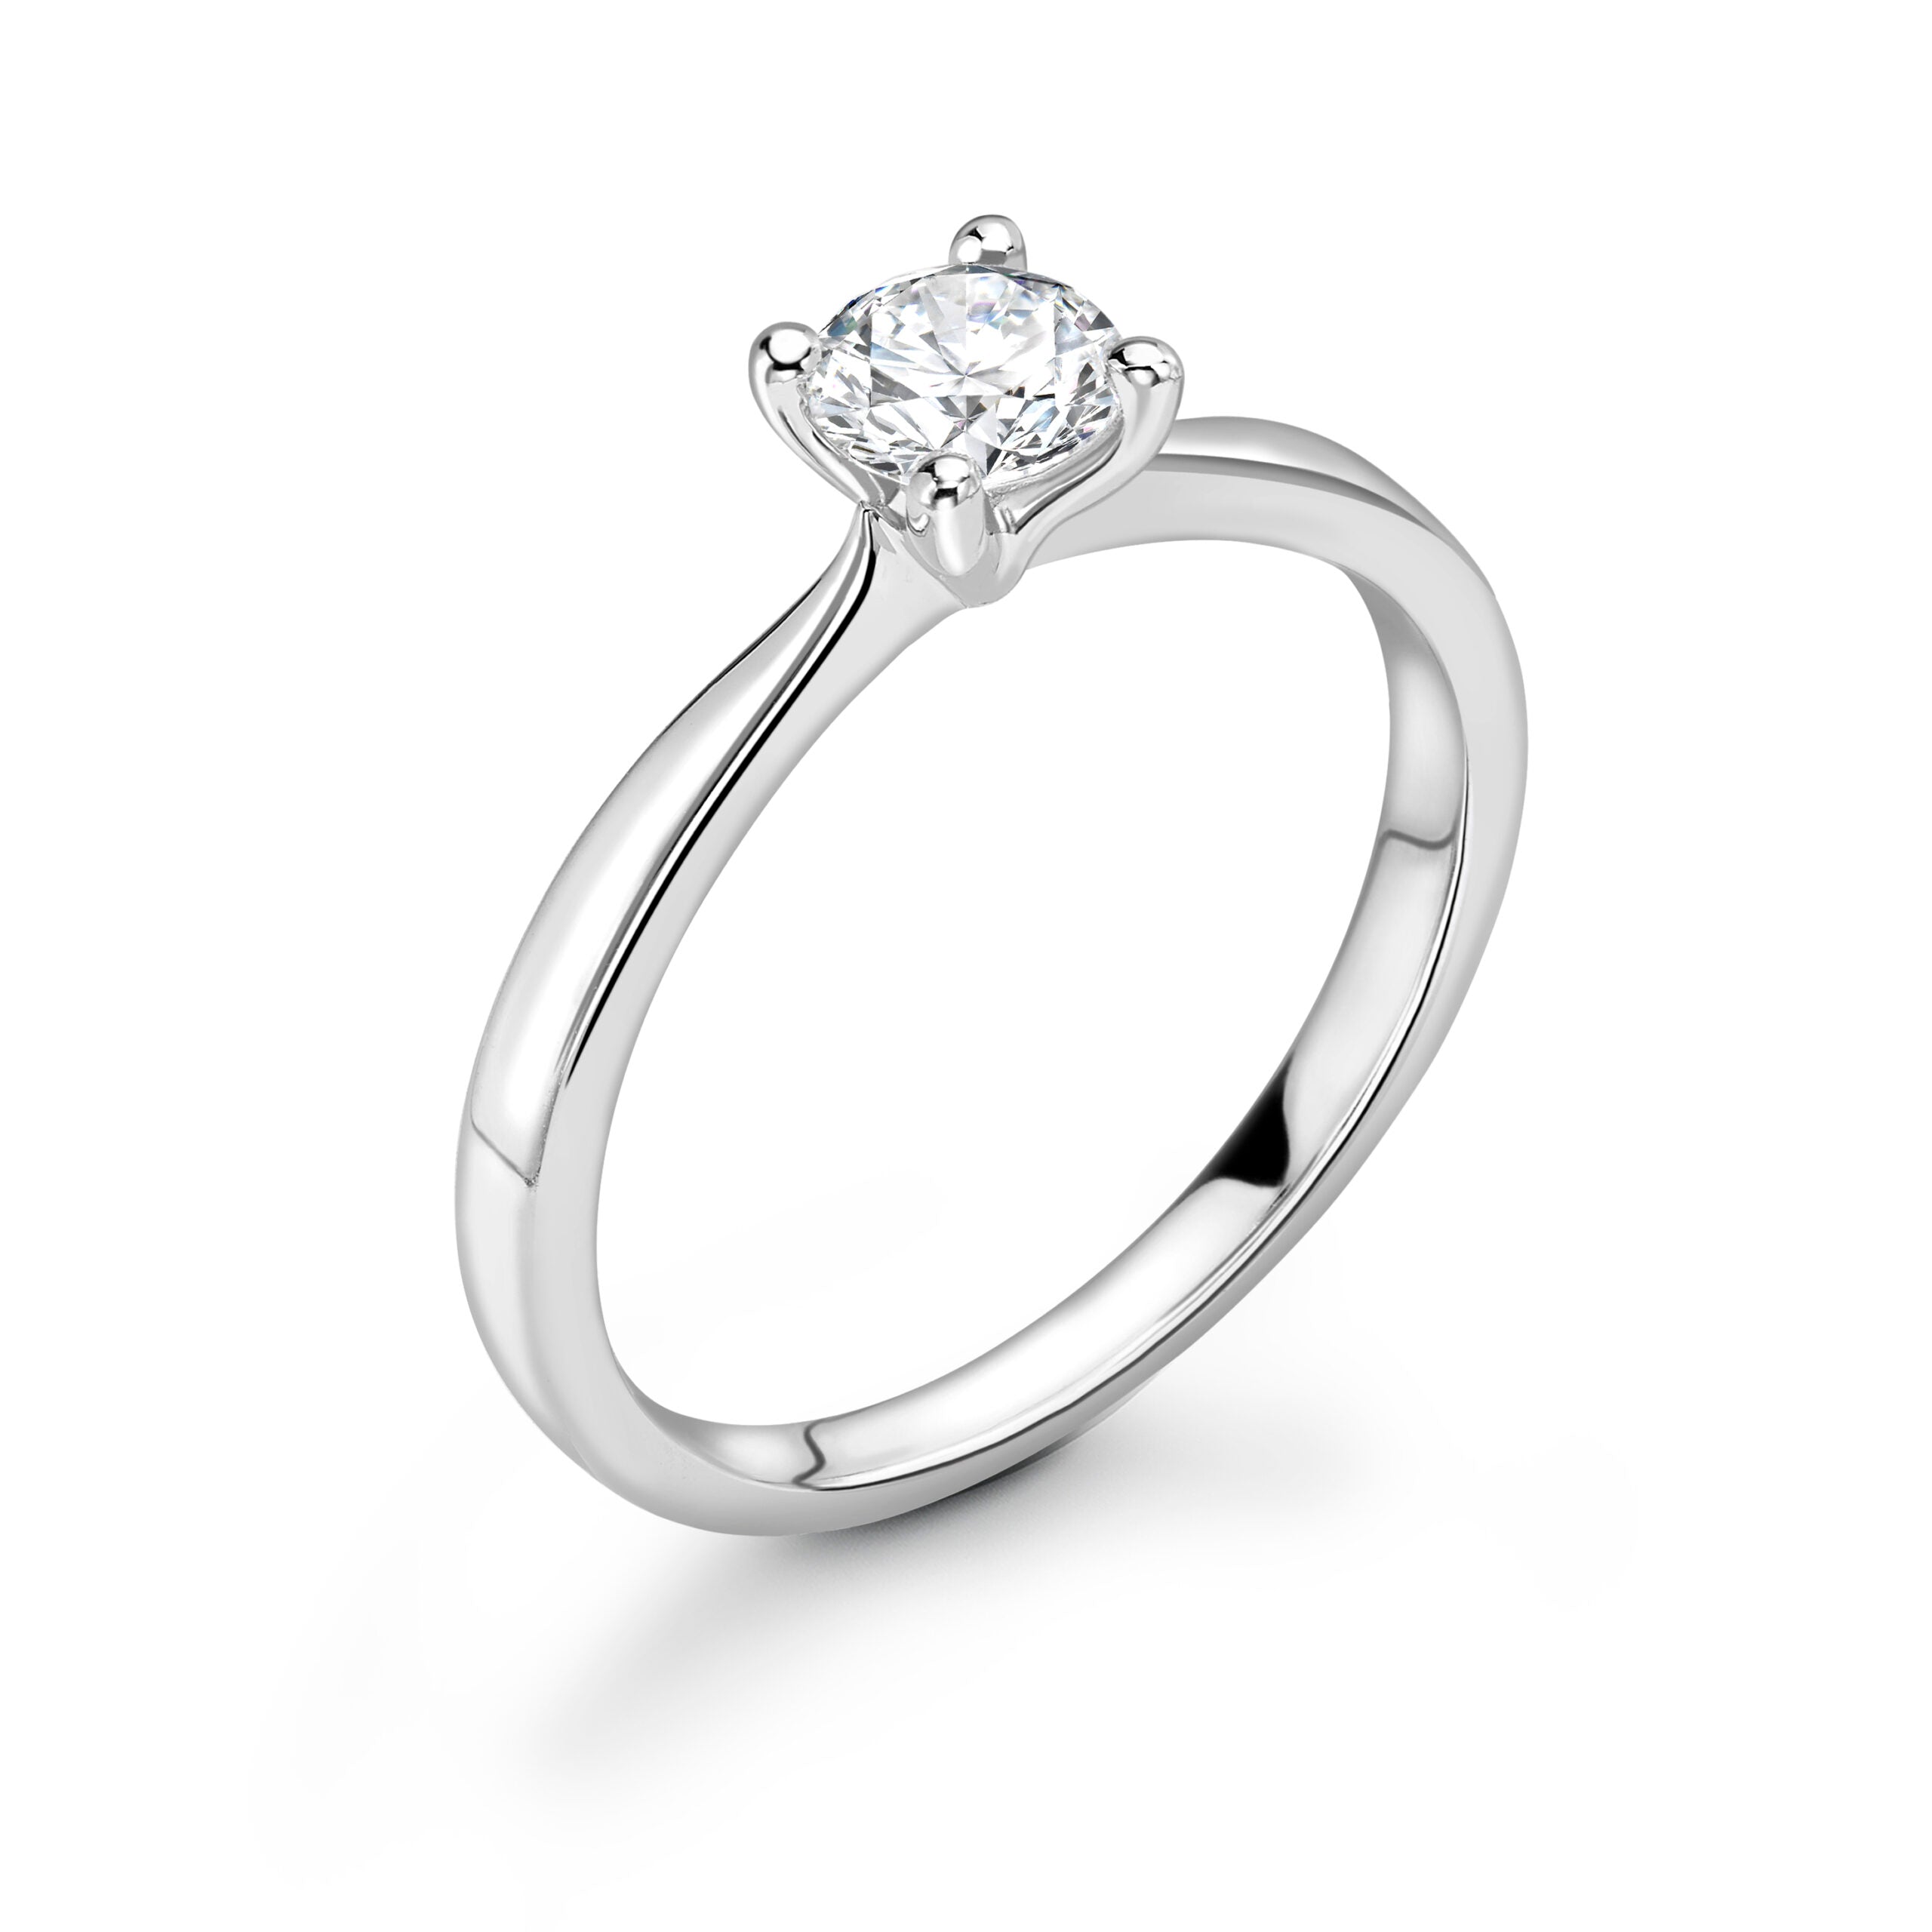 Round Solitaire Diamond ring in White Gold